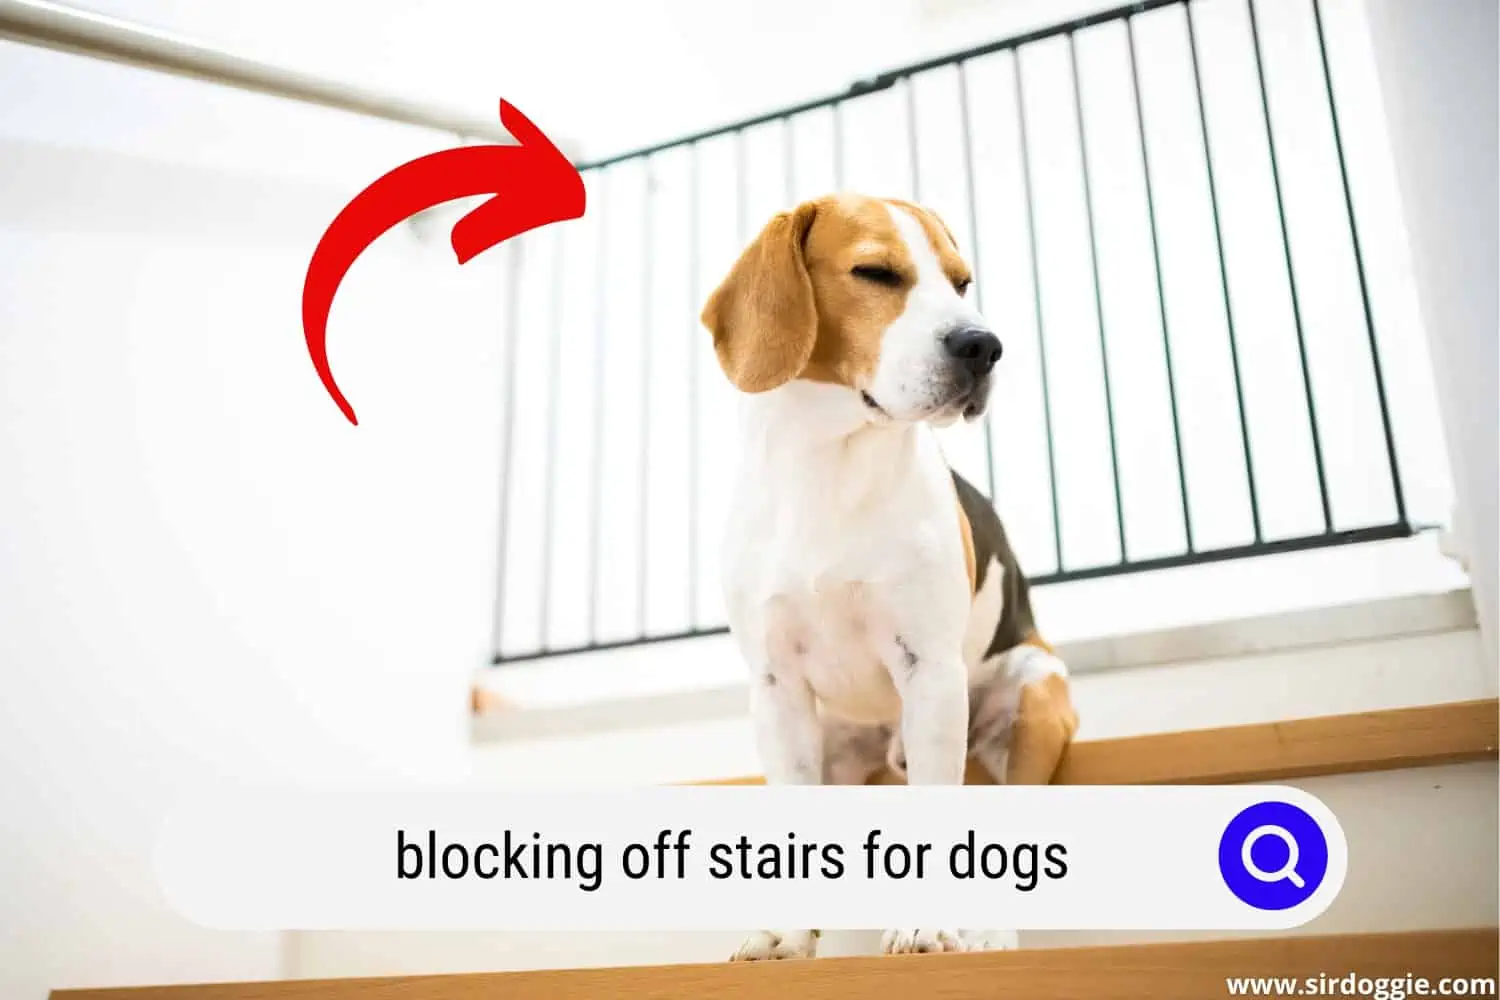 Dog waiting in stairs with blocks behind